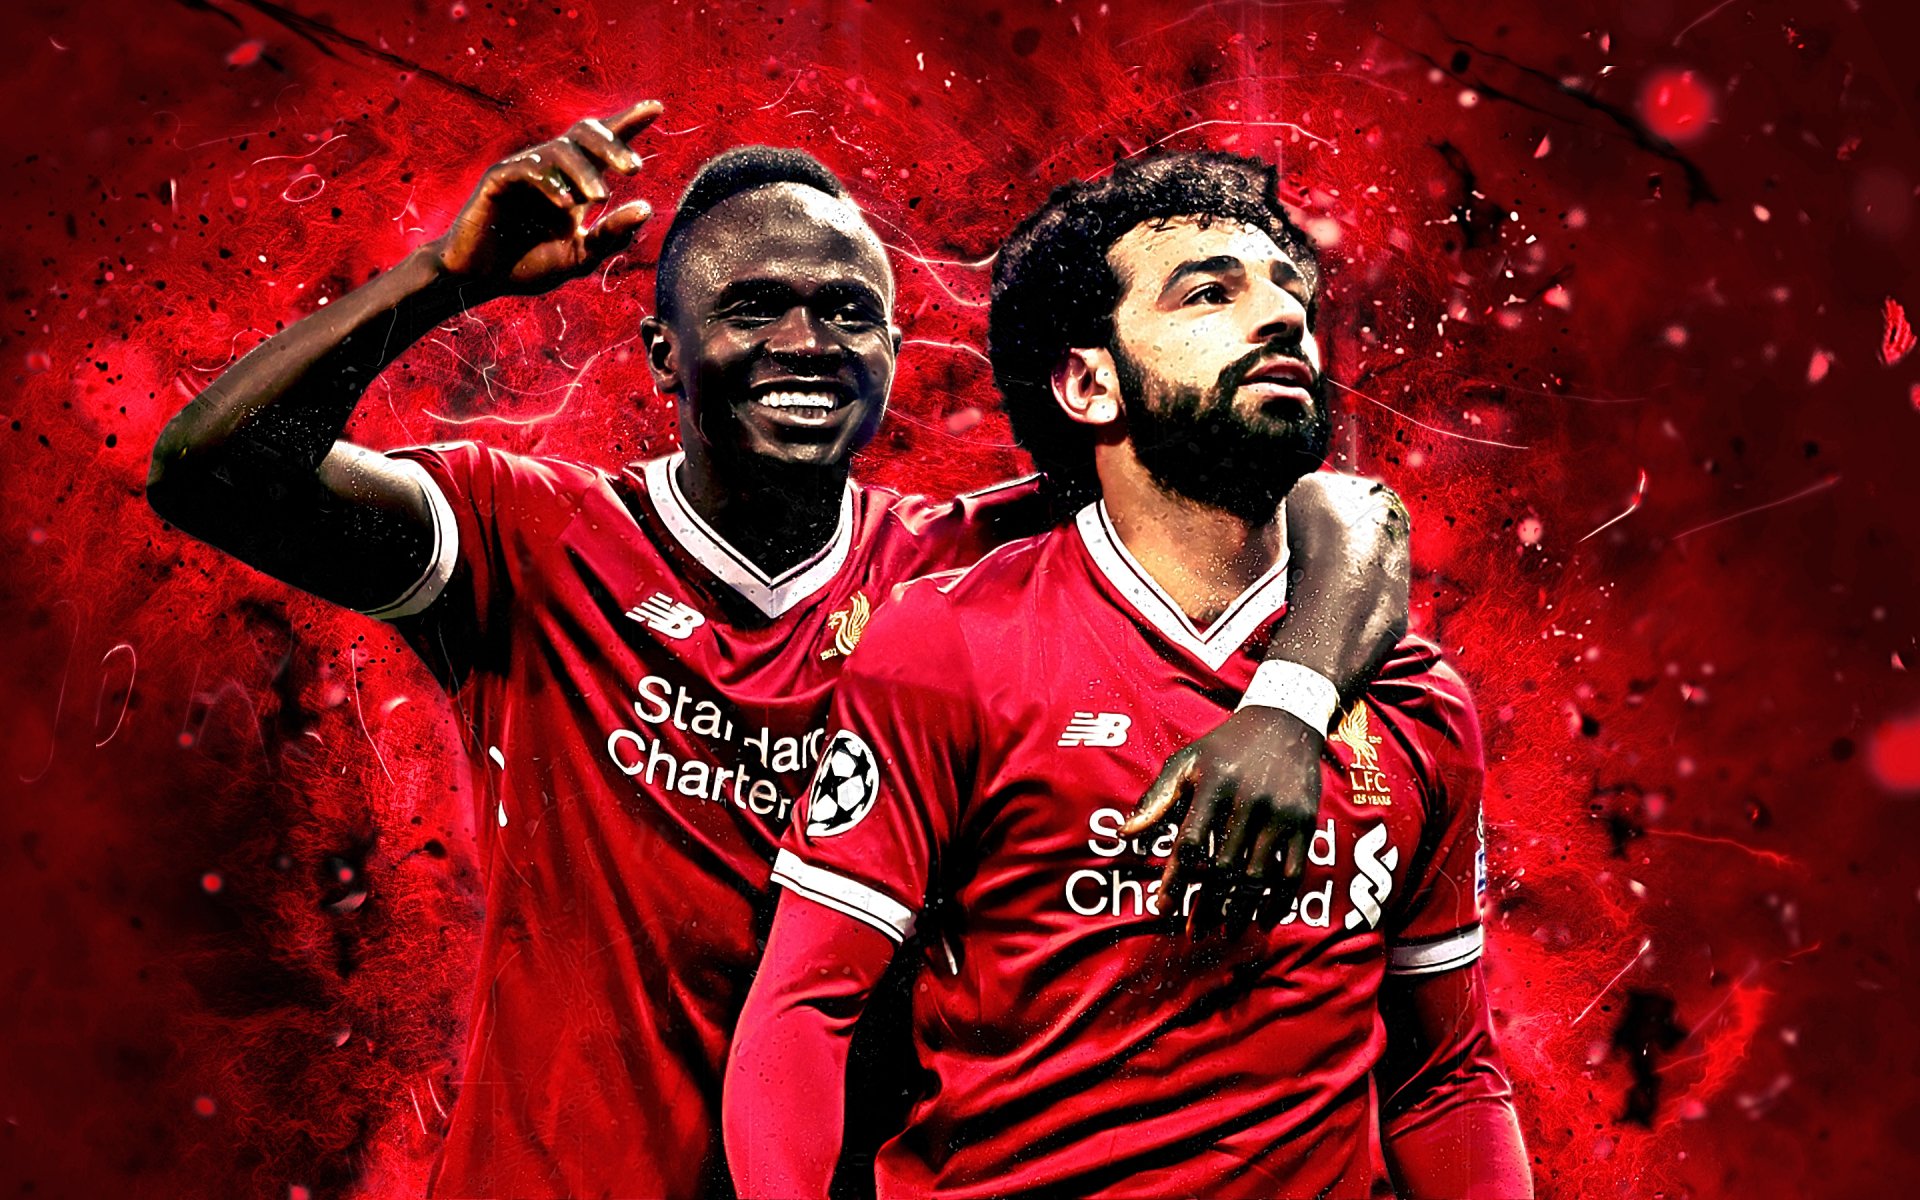 mane wallpaper,red,product,football player,music artist,performance